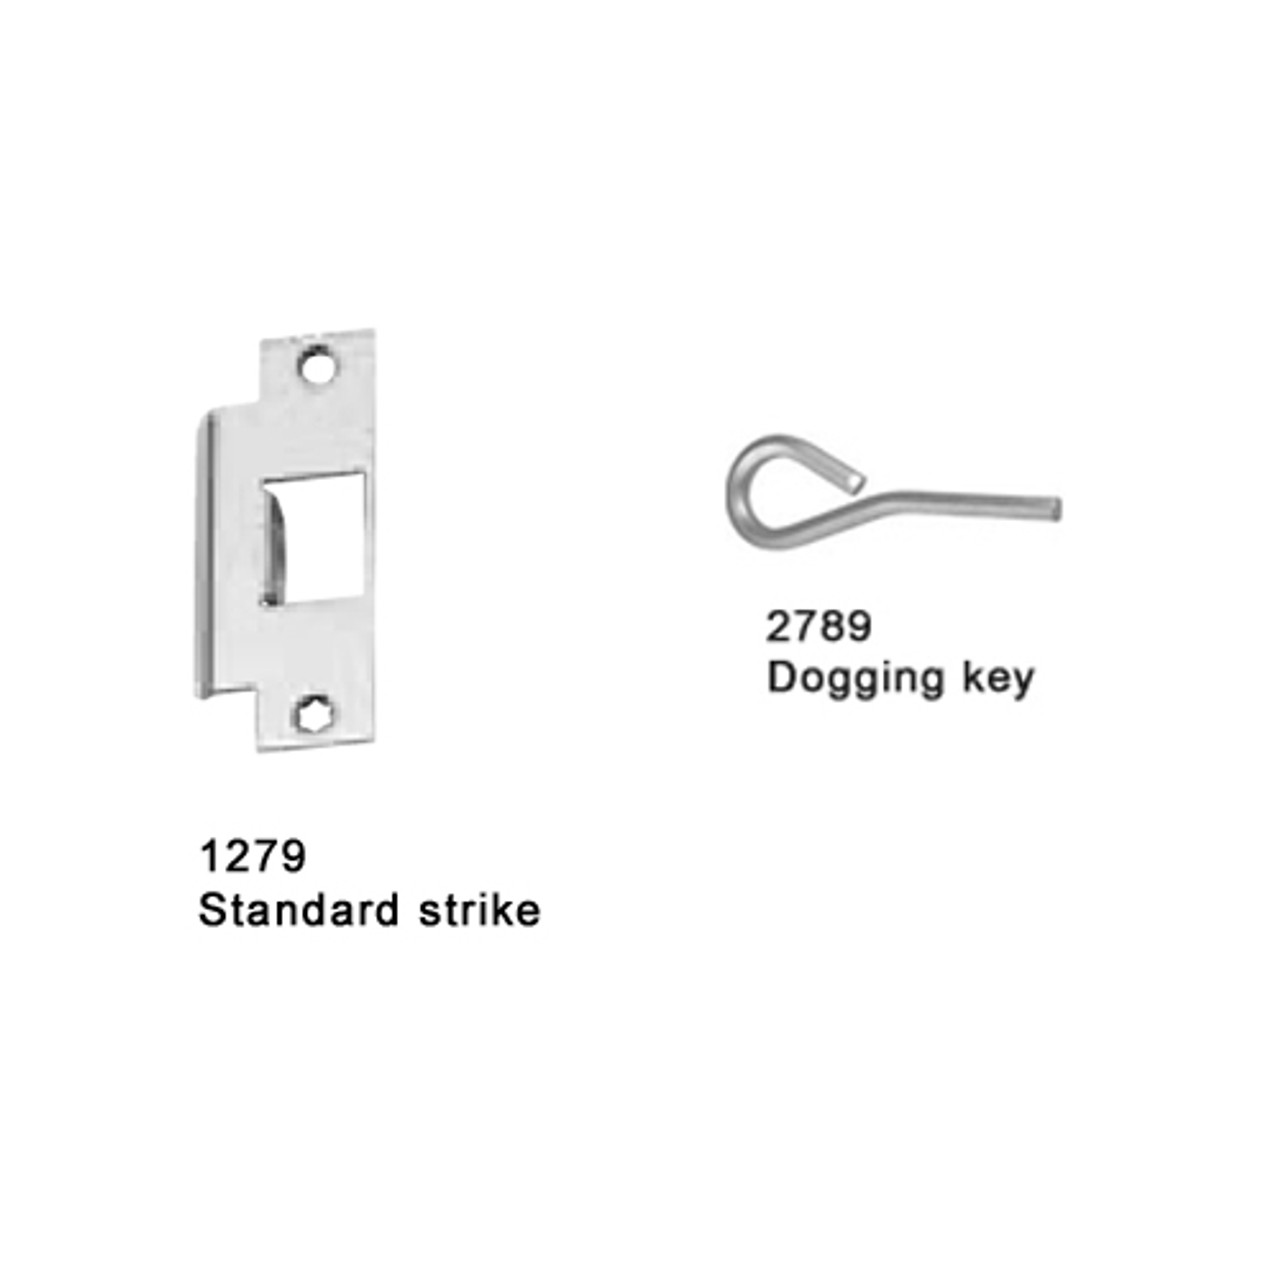 25-M-L-NL-DANE-US26-3-RHR Falcon 25 Series Mortise Lock Devices 510L-NL Dane Lever Trim with Night Latch in Polished Chrome